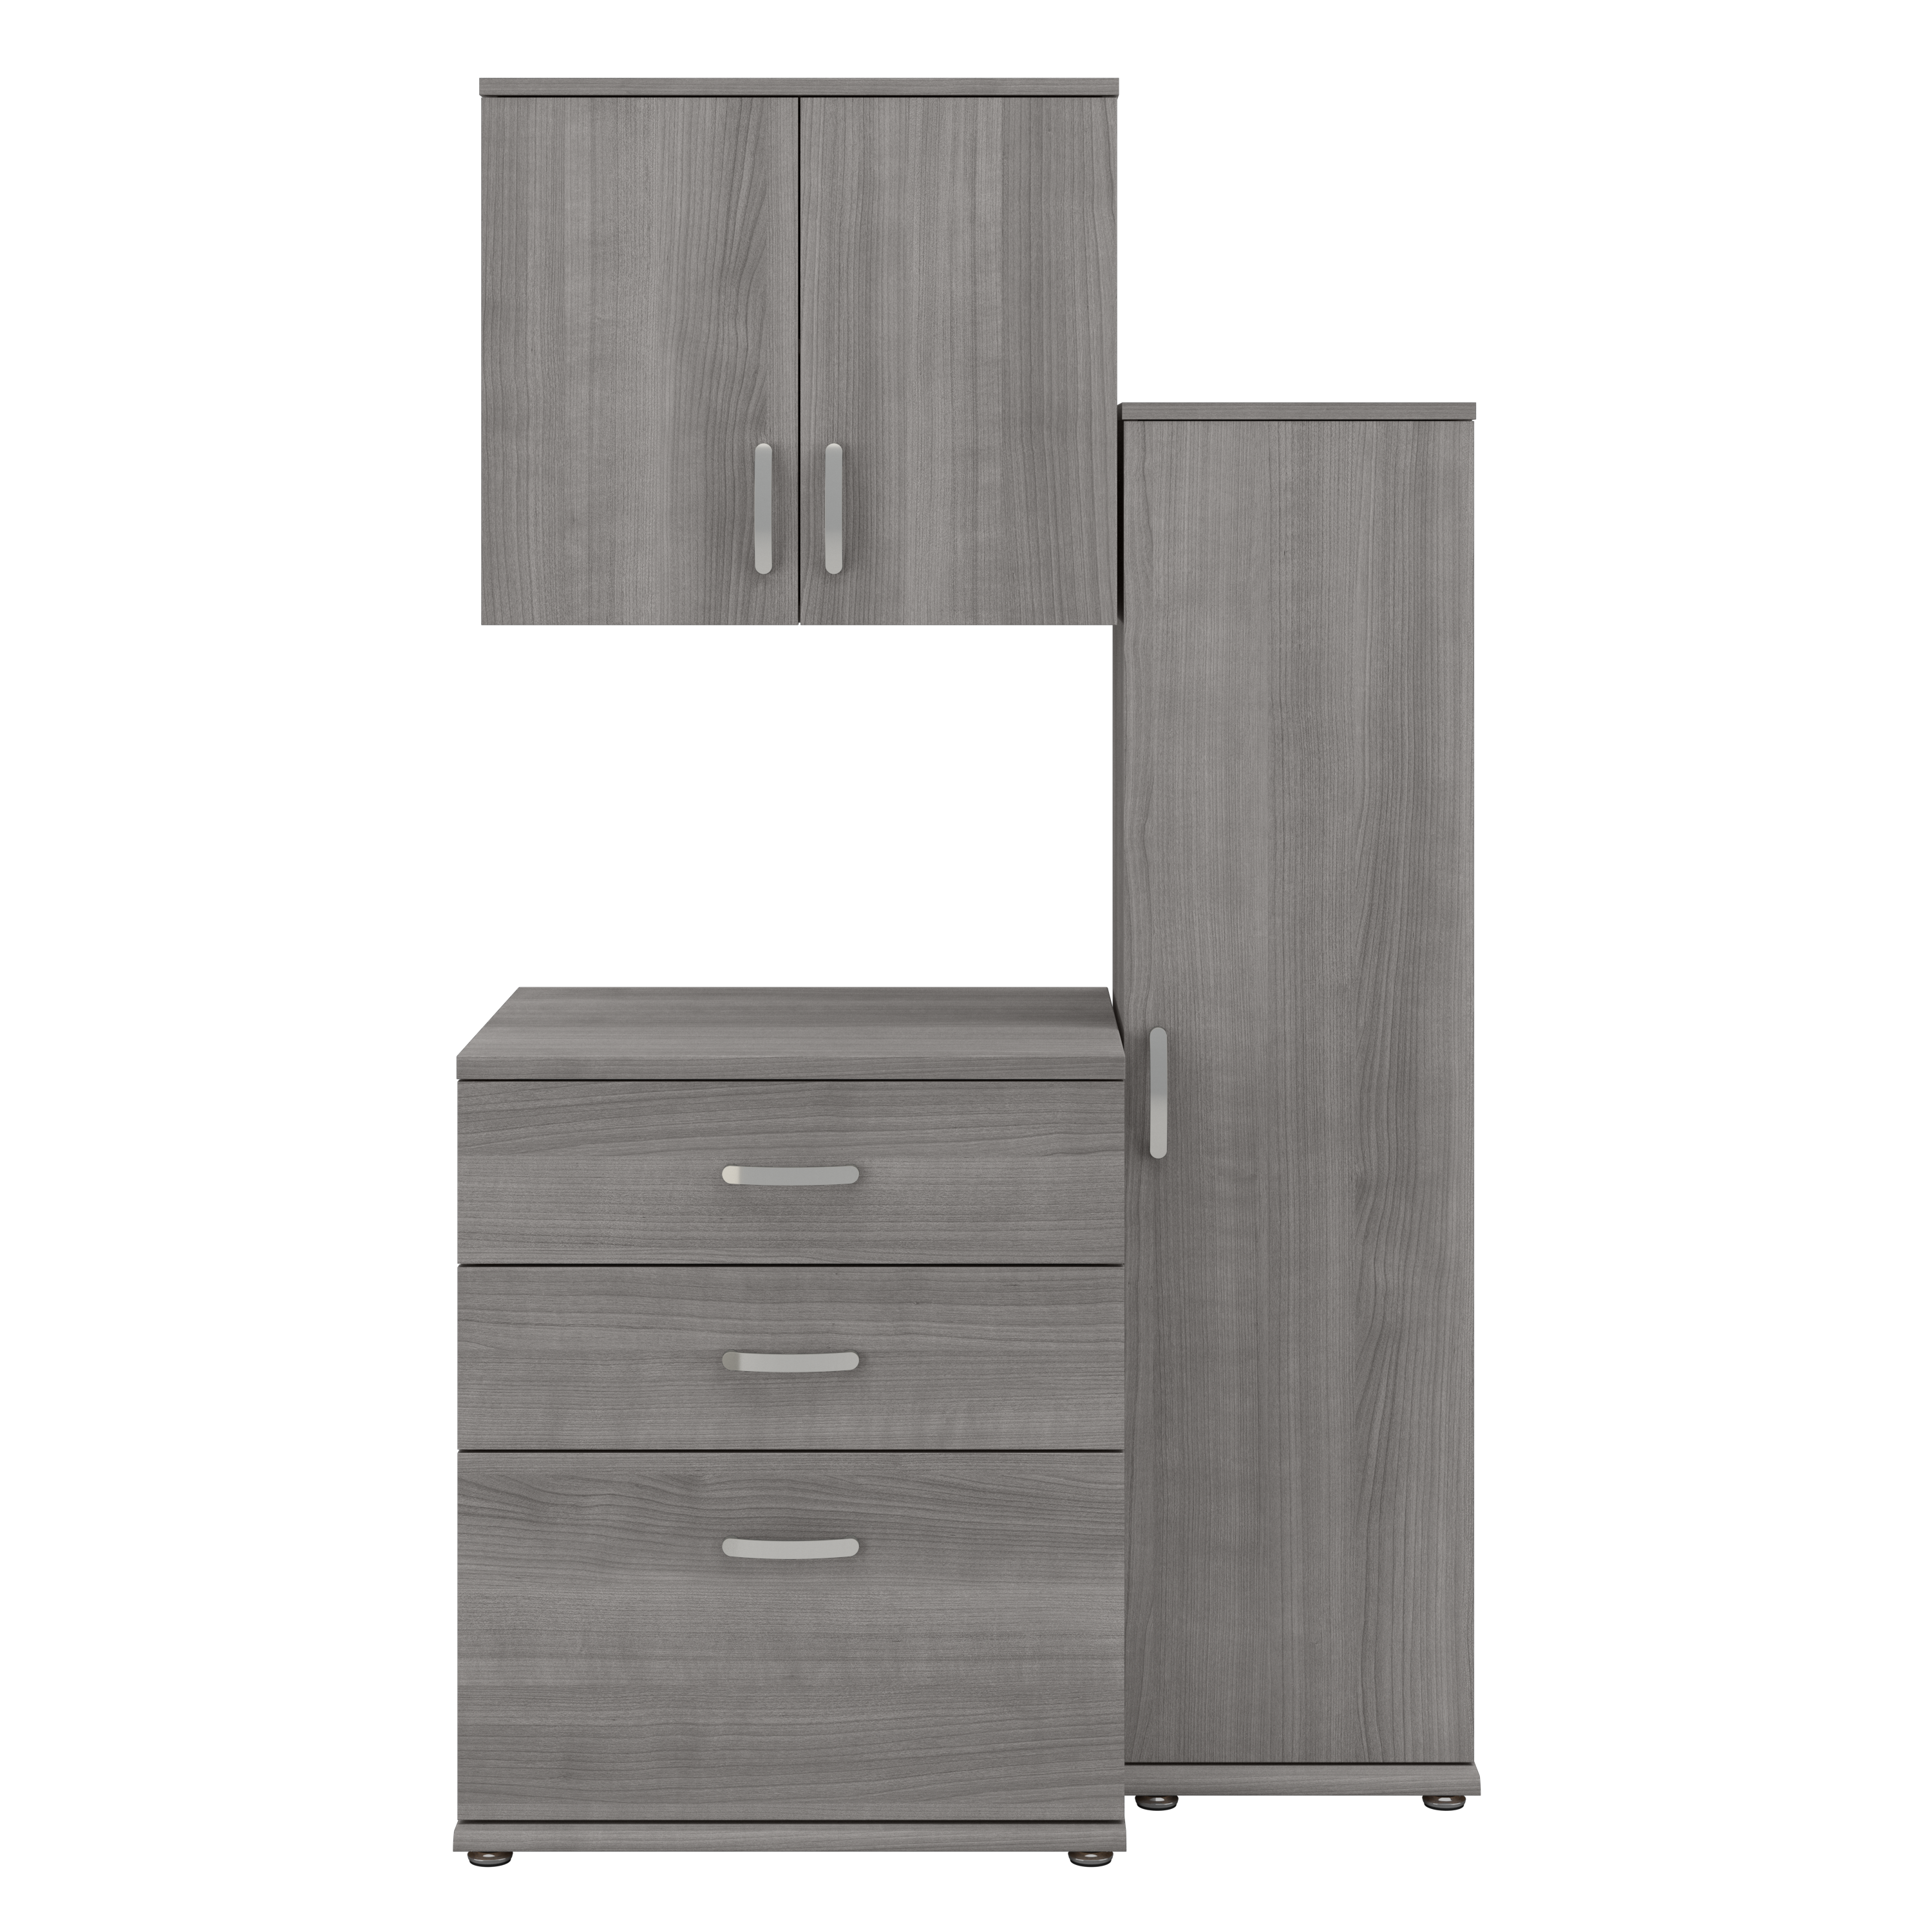 Shop Bush Business Furniture Universal 3 Piece Modular Closet Storage Set with Floor and Wall Cabinets 02 CLS005PG #color_platinum gray